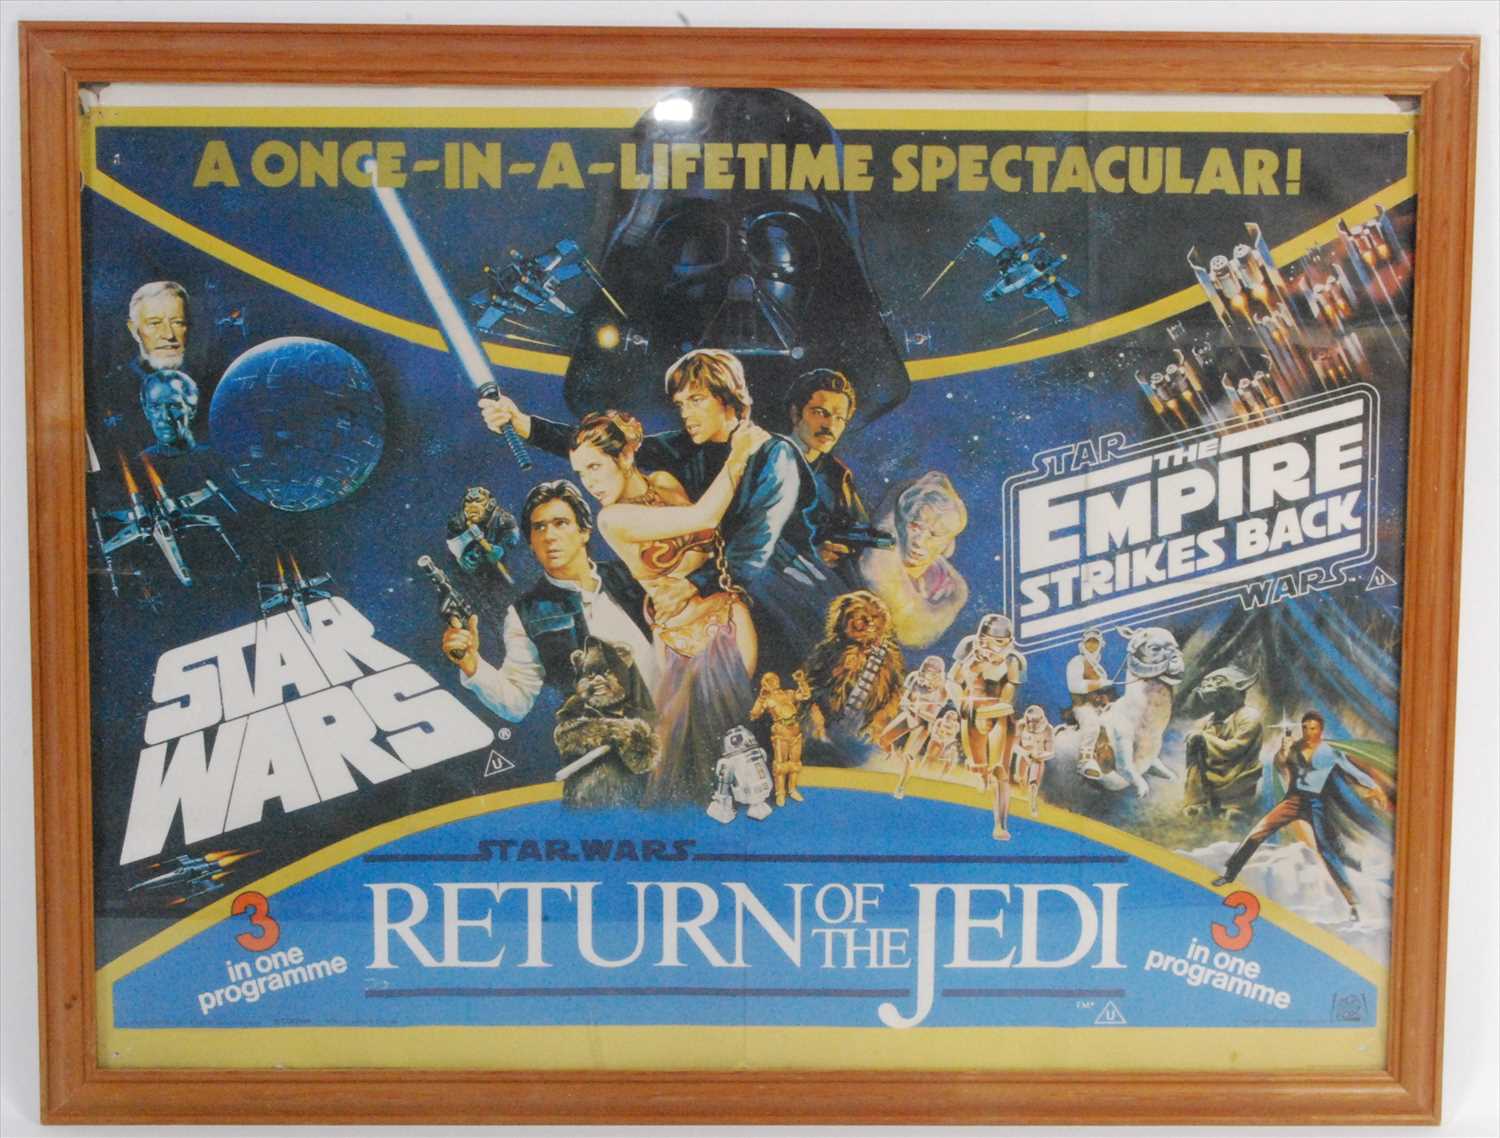 Lot 550 - Star Wars, a UK quad poster for the 3 in 1 Programme